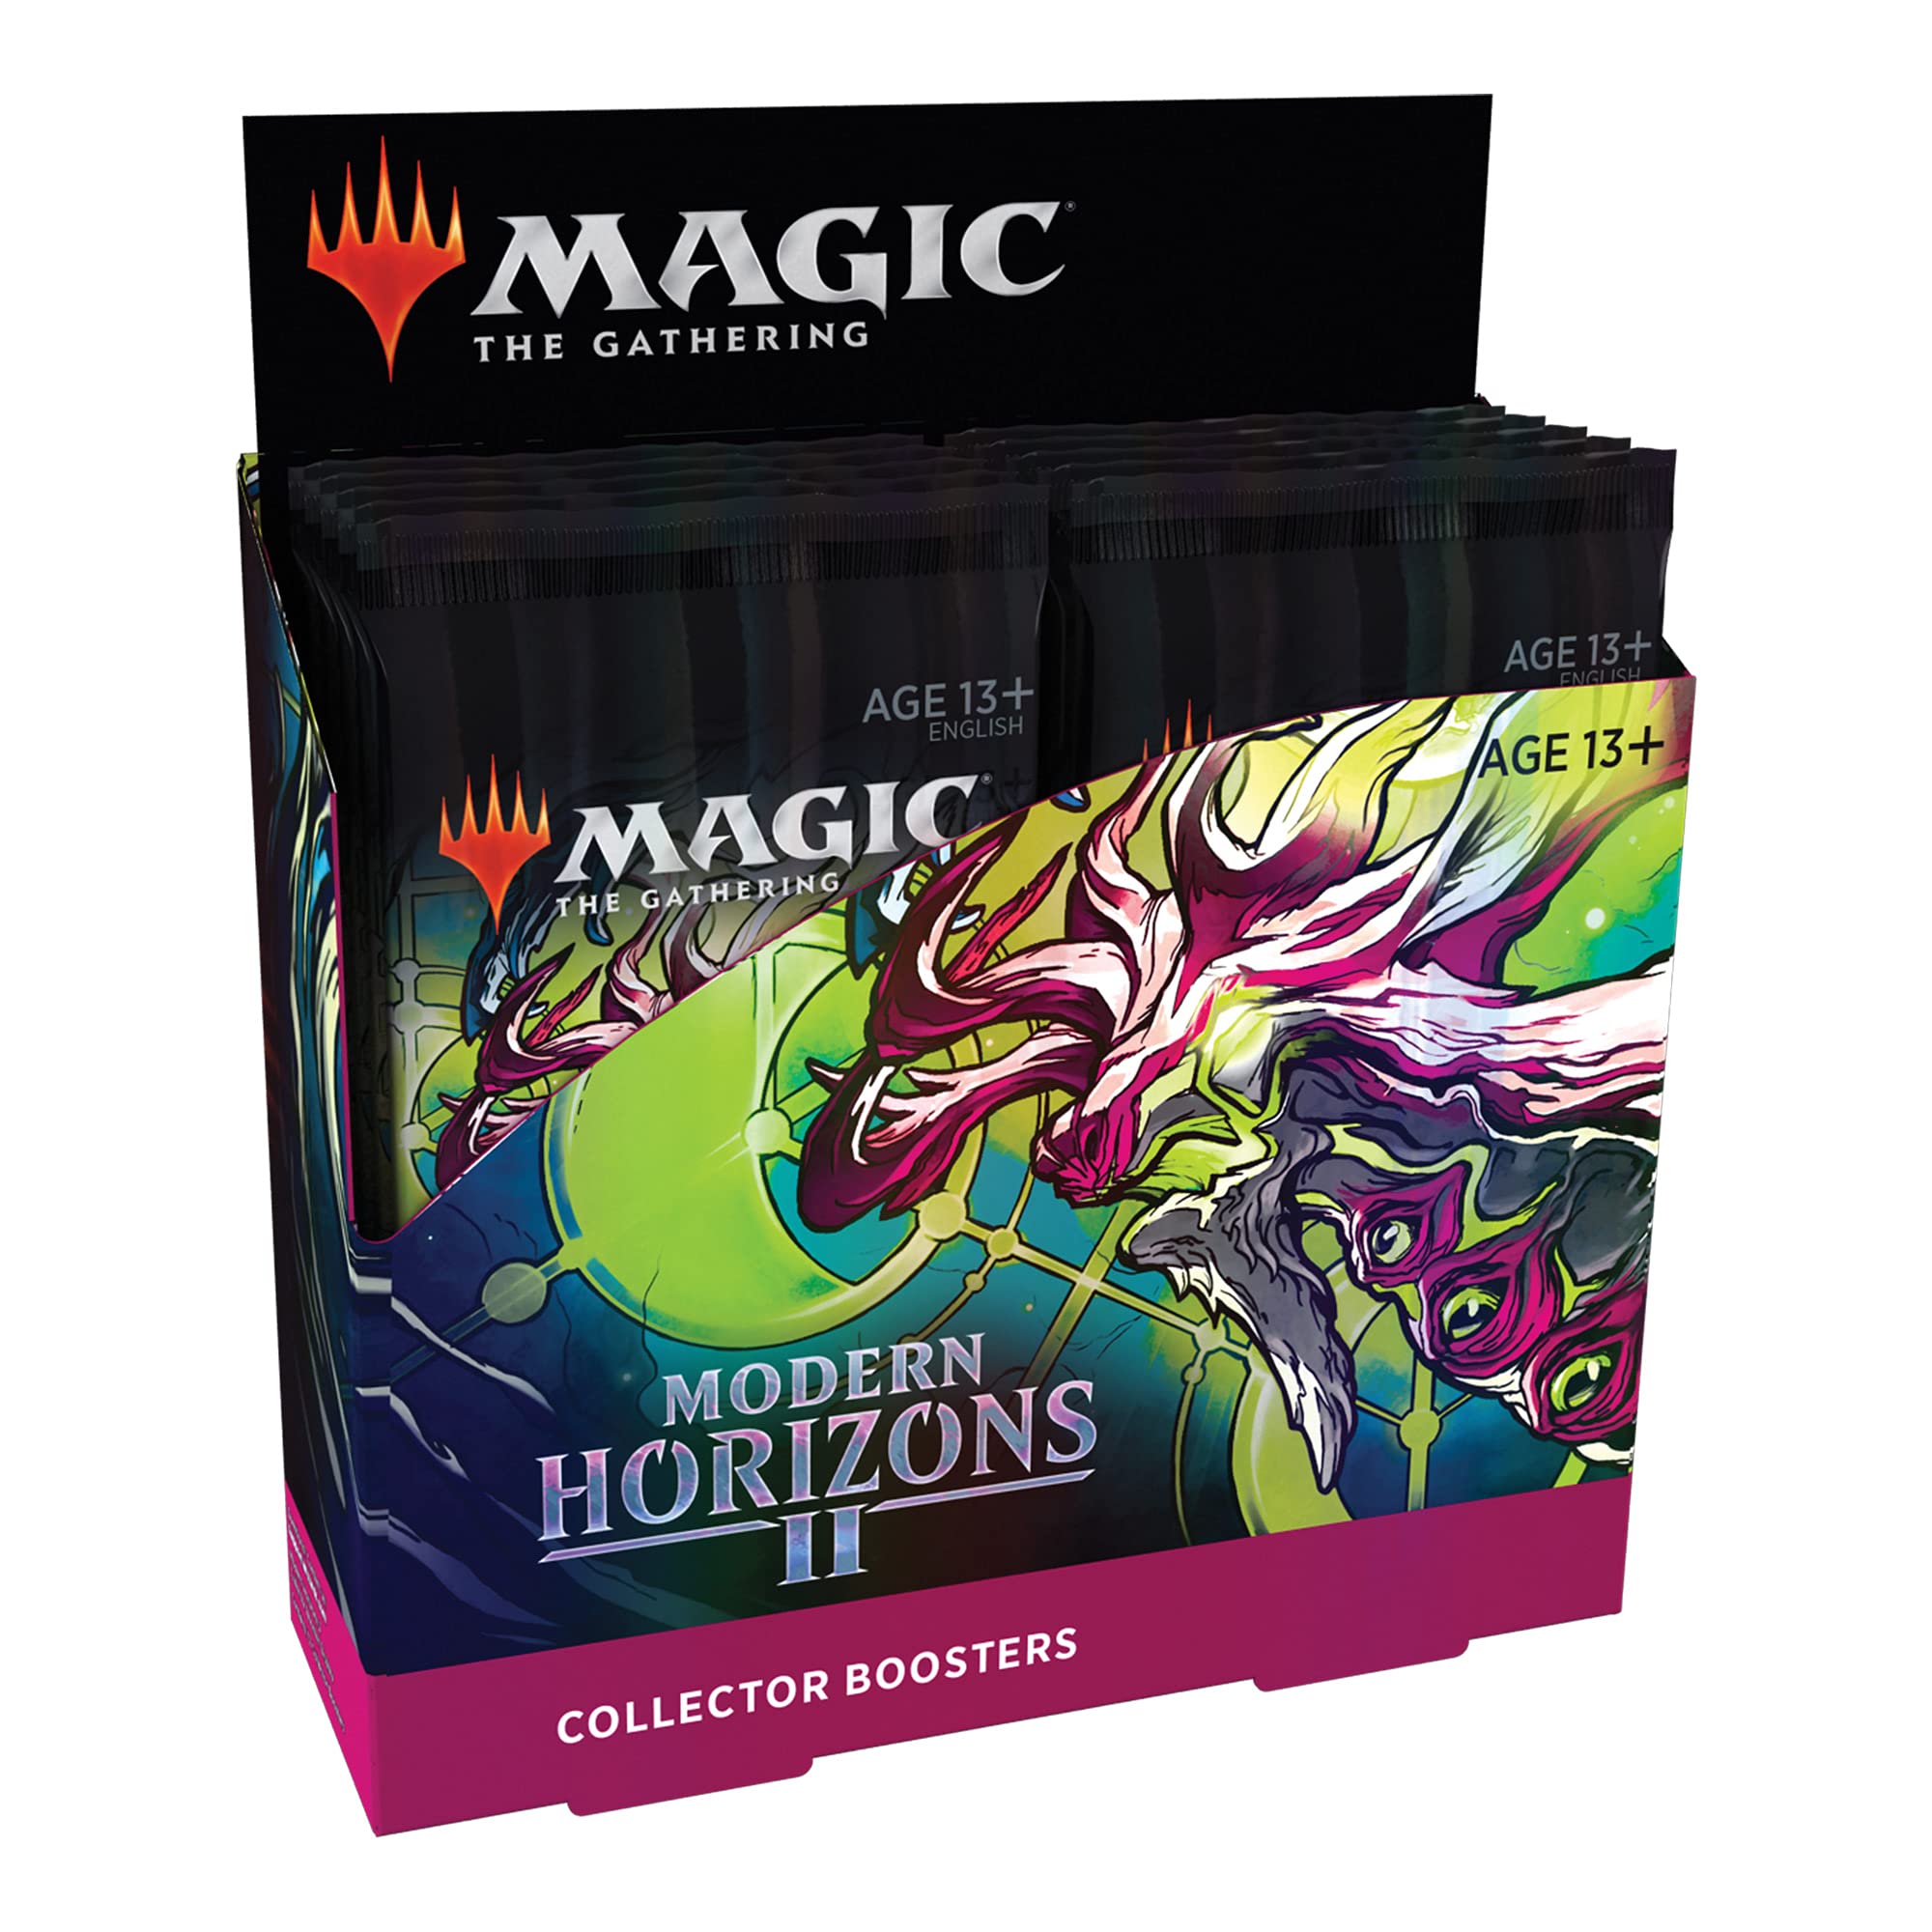 Magic The Gathering Modern Horizons 2 Collector Booster Box | 12 Packs (180 Magic Cards)